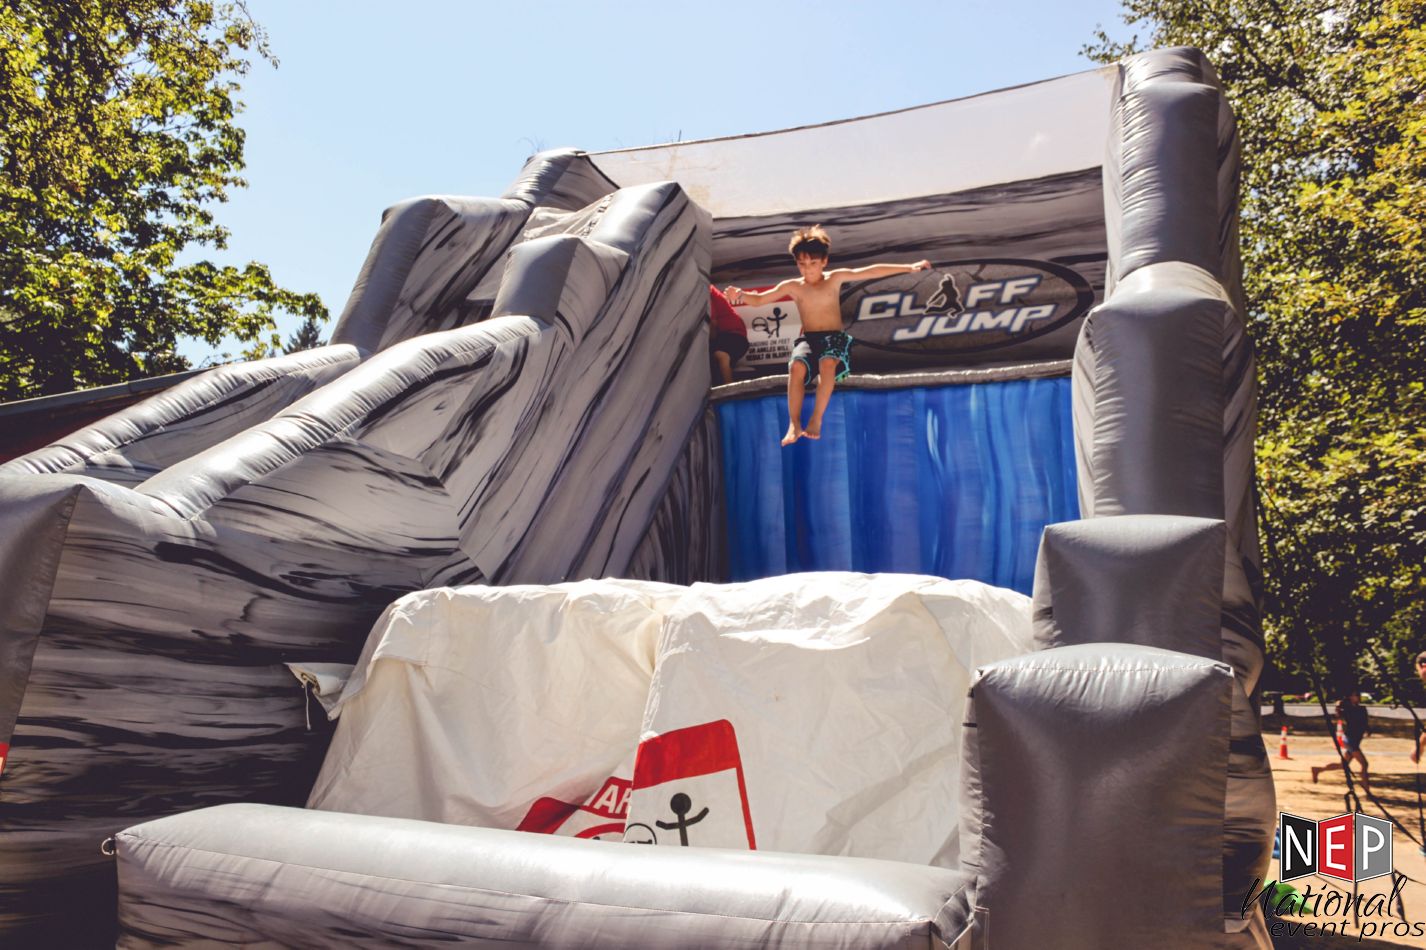 Cliff Jump Inflatable Game Rental